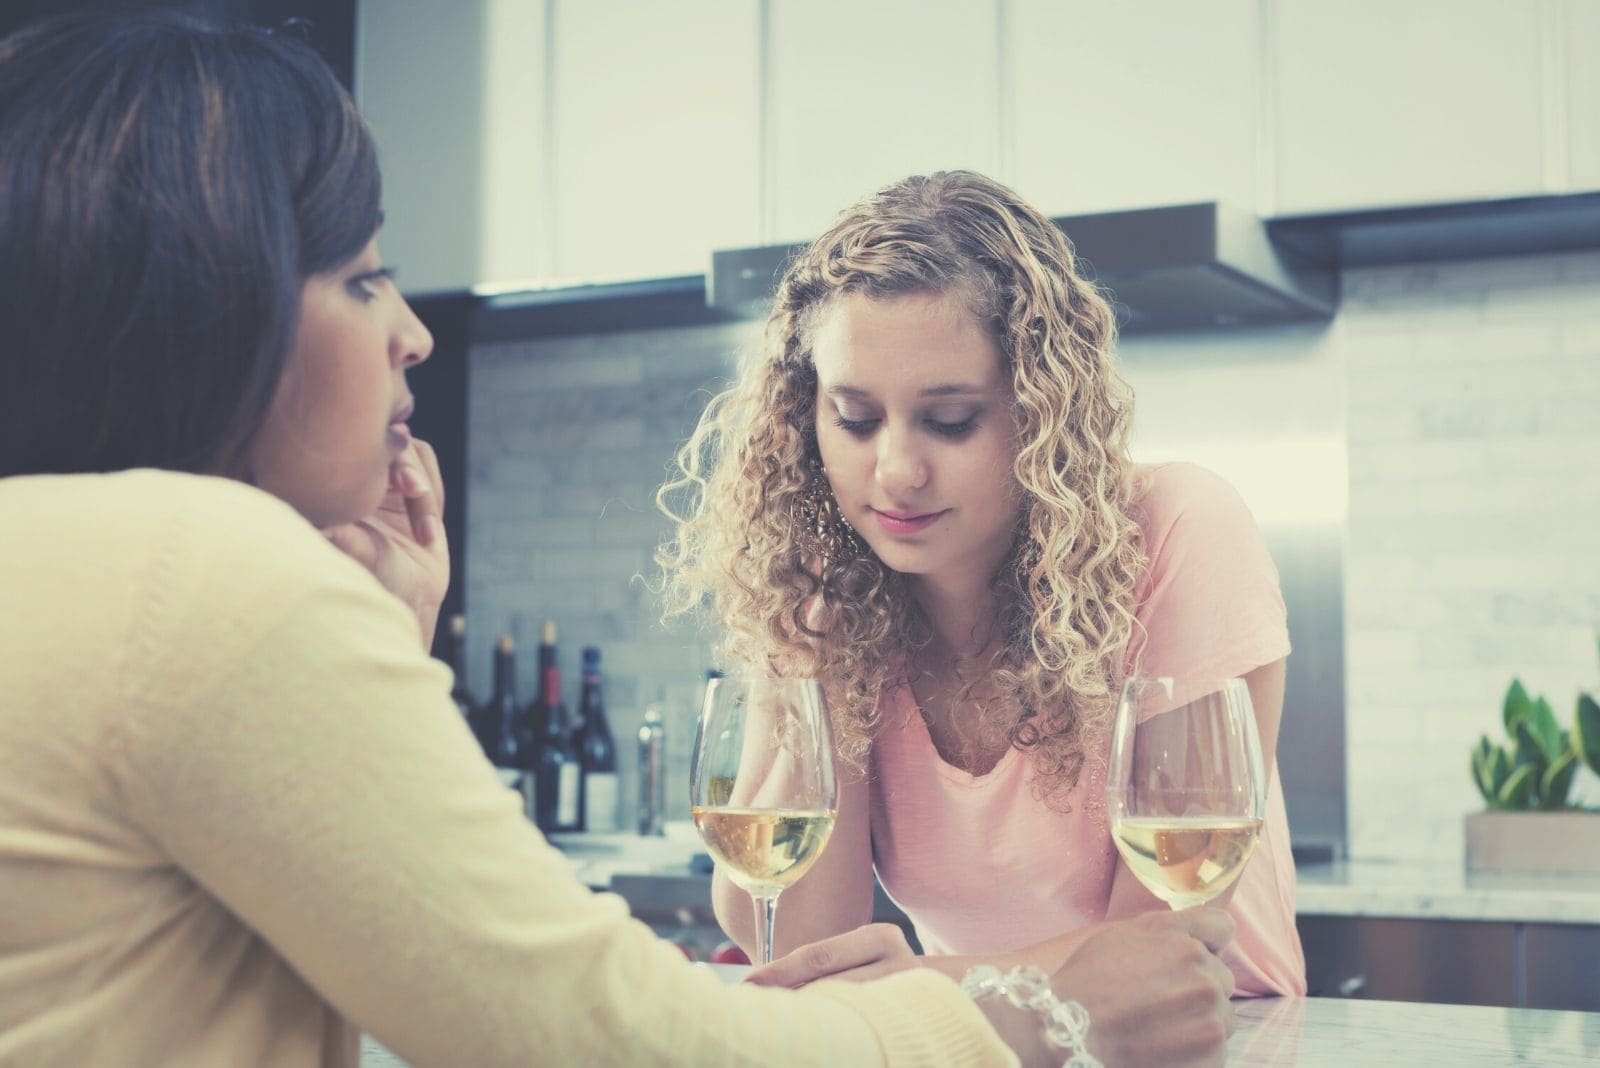 two women friends talking seriously in the kitchen while drinking wine